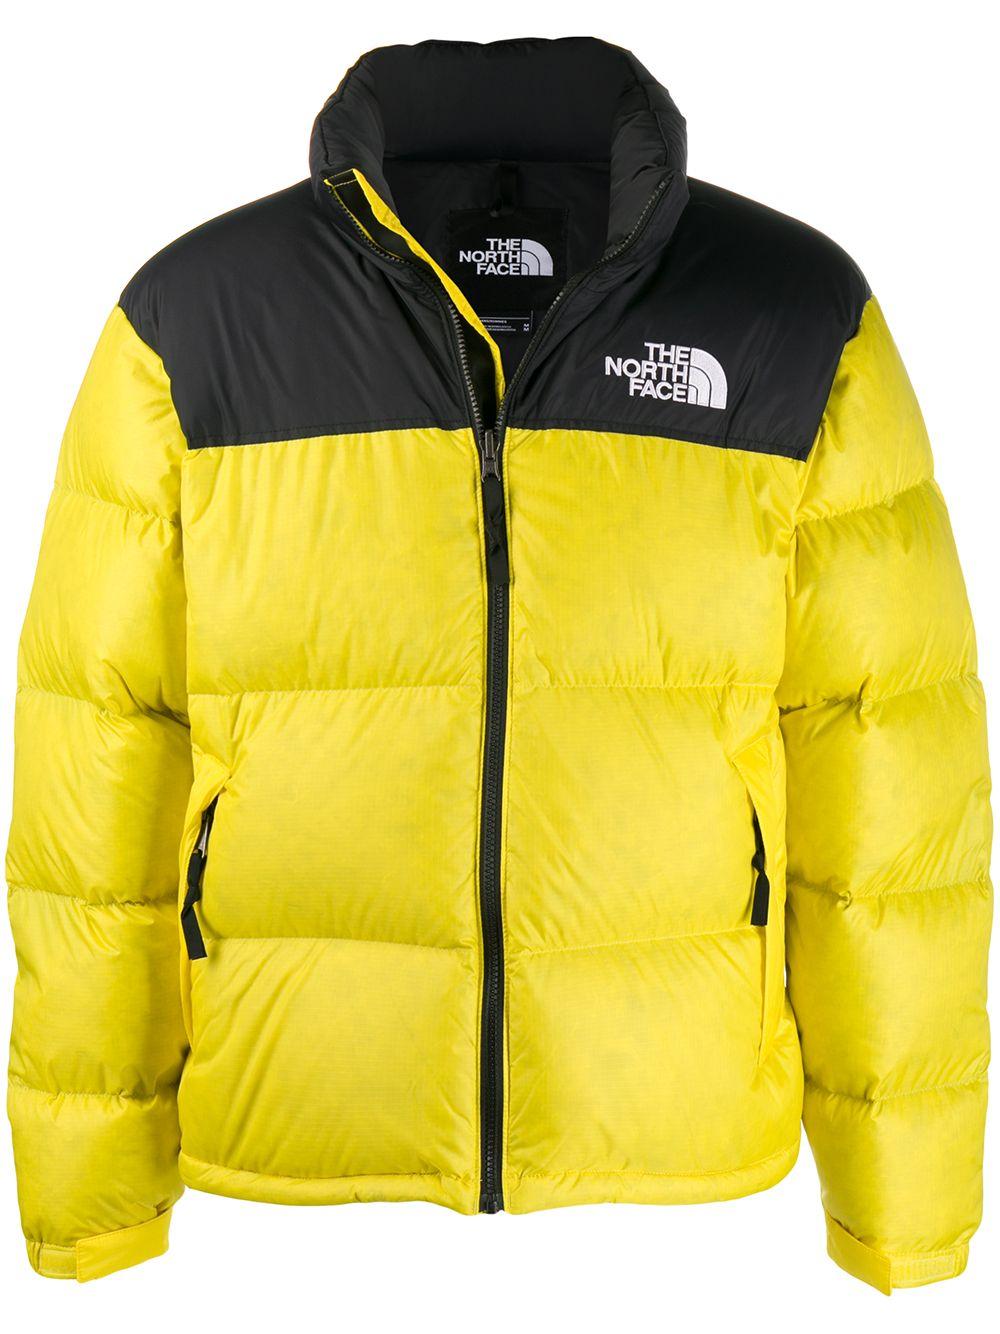 The North Face 1996 Retro Nuptse Padded Jacket in Yellow for Men - Lyst